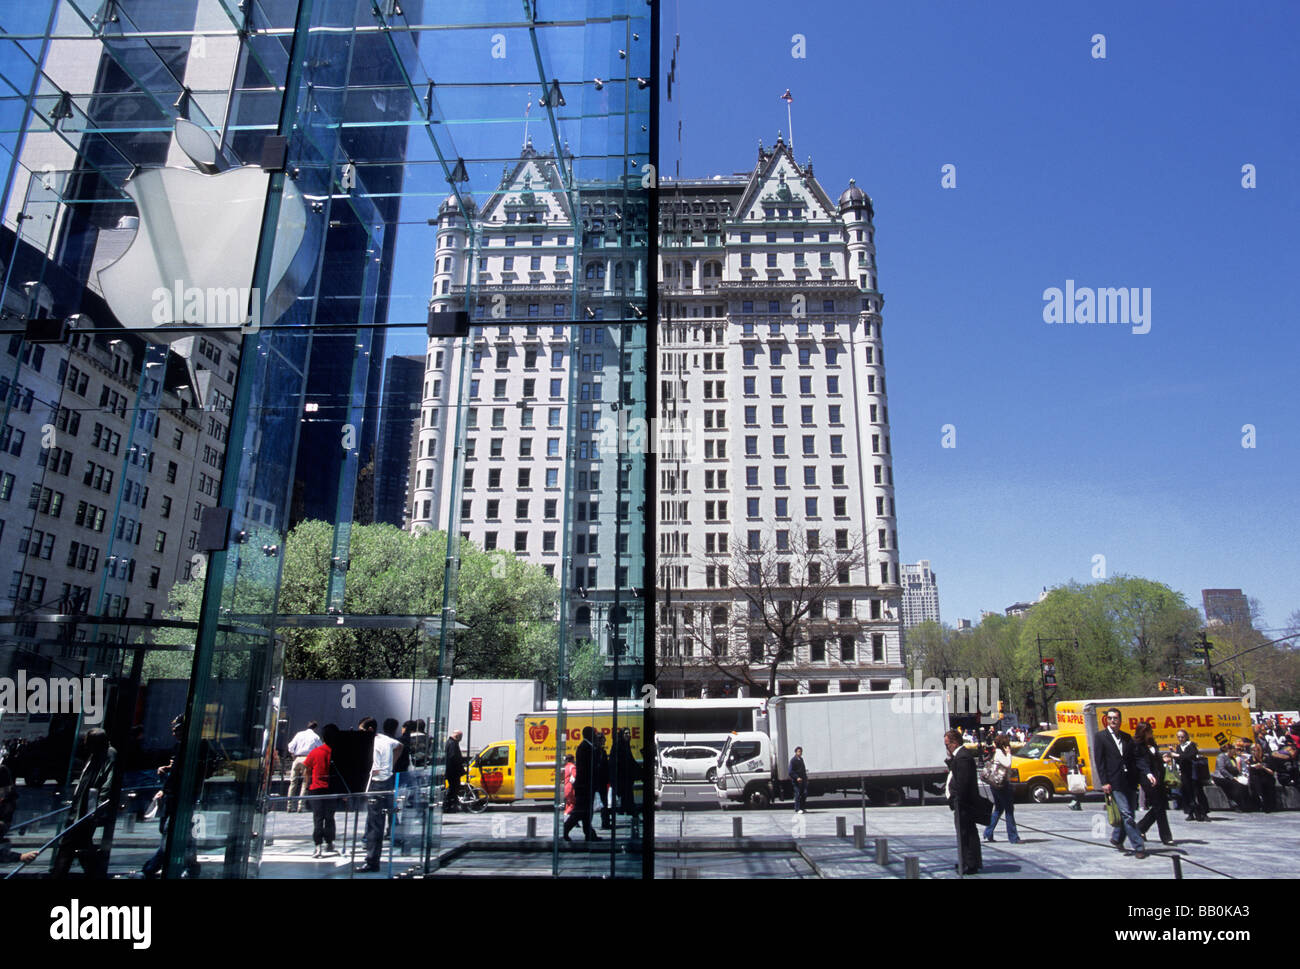 New York City Fifth Avenue The Plaza Hotel and The Apple Store NYC USA Stock Photo